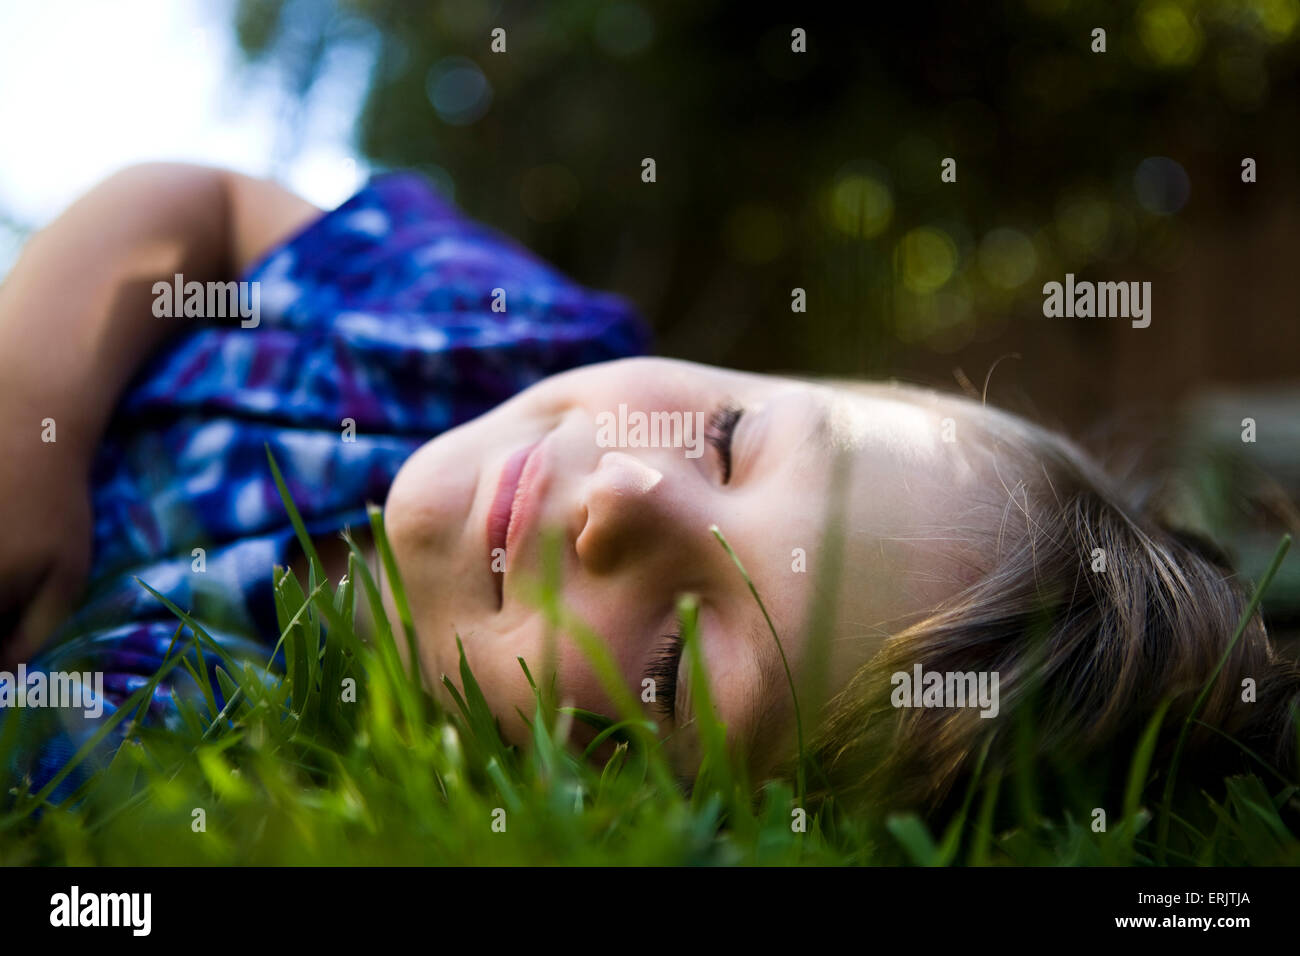 young cute boy sleeping and dreaming in the grass Stock Photo